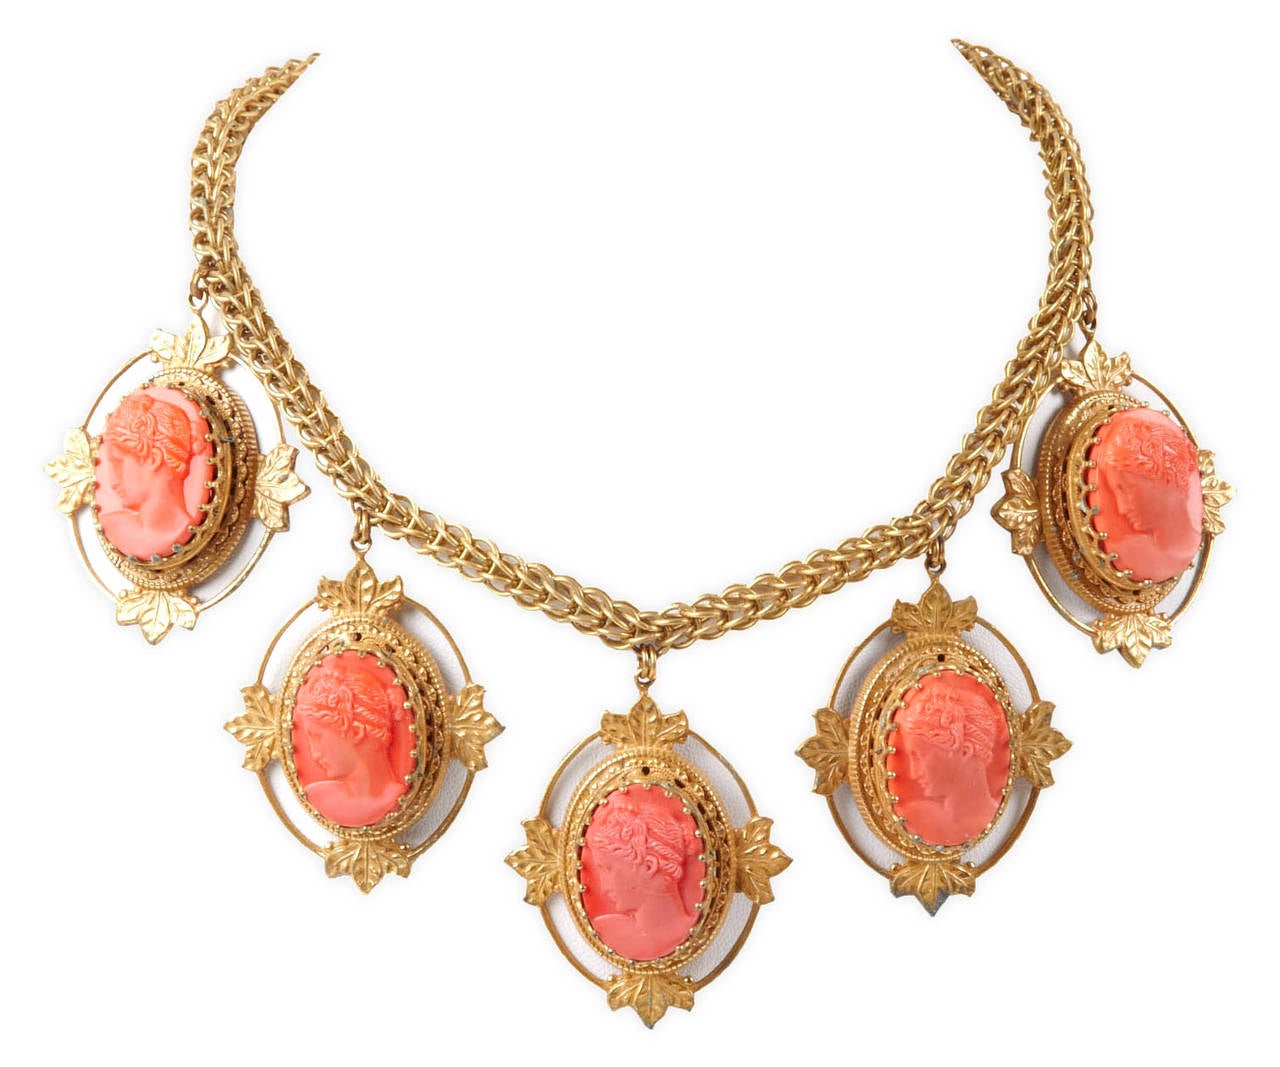 Miriam Haskell's coral glass cameo necklace set in signature Russian gilt filigree. Woven triple chain with 5 neoclassical cameo pendants set in filigree leaf frames.
Length 2